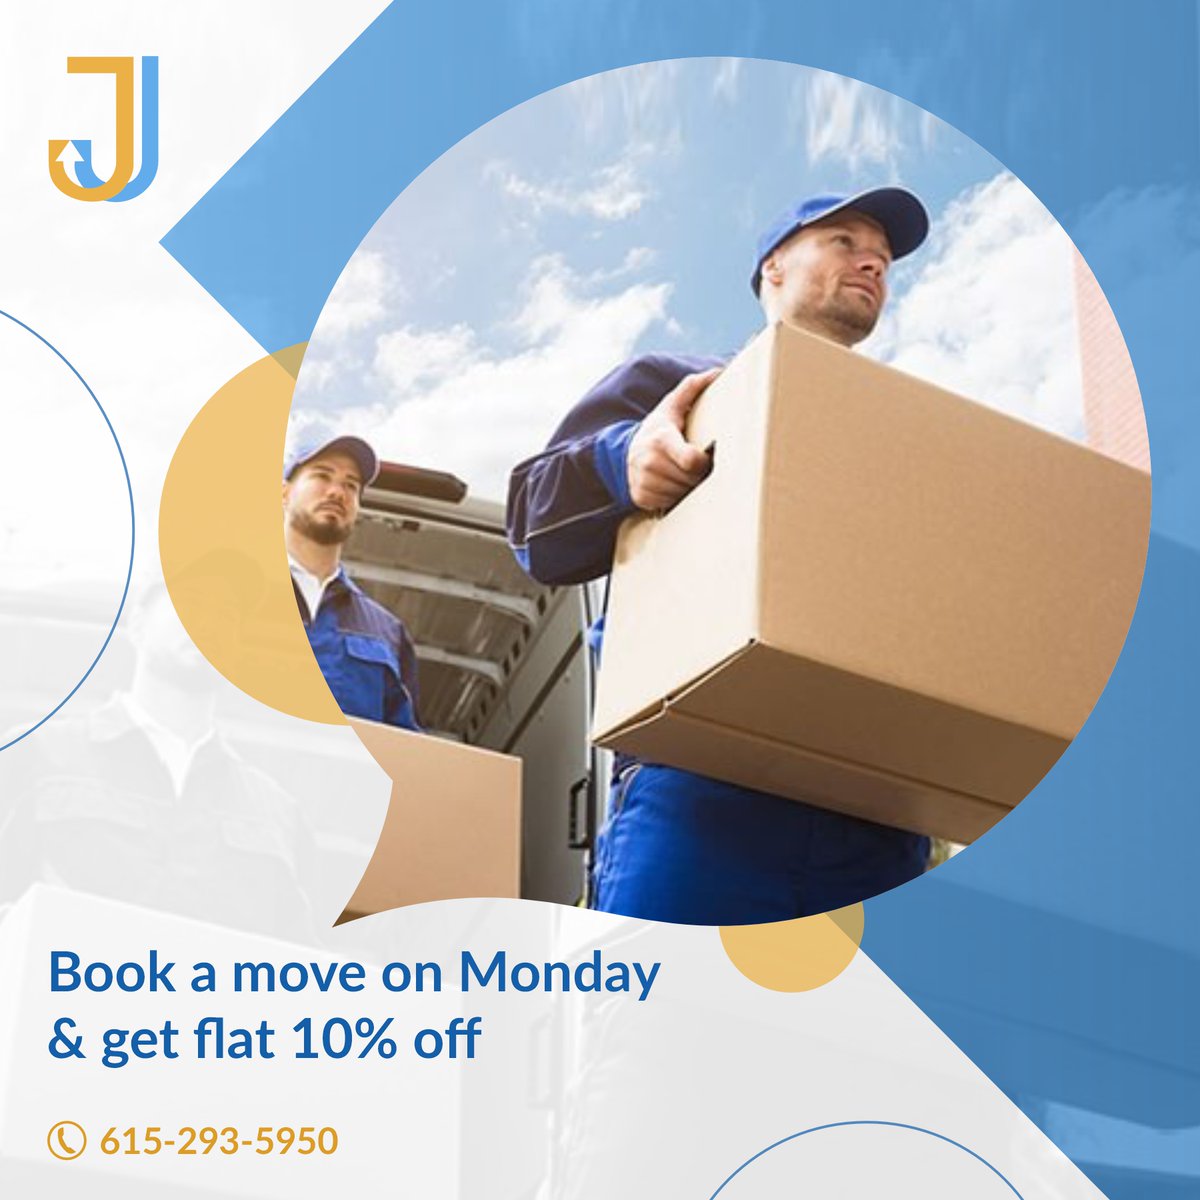 Move into savings this Monday! Book with Jordan Solutions and enjoy 10% off your move. Don't miss out on this limited-time offer!

Call Us On +1 615-293-5950

#RelocationExperts #NewBeginnings #MovingMadeEasy #SmoothTransition #SeamlessExperience #MovingDay #WhiteGloveMoving